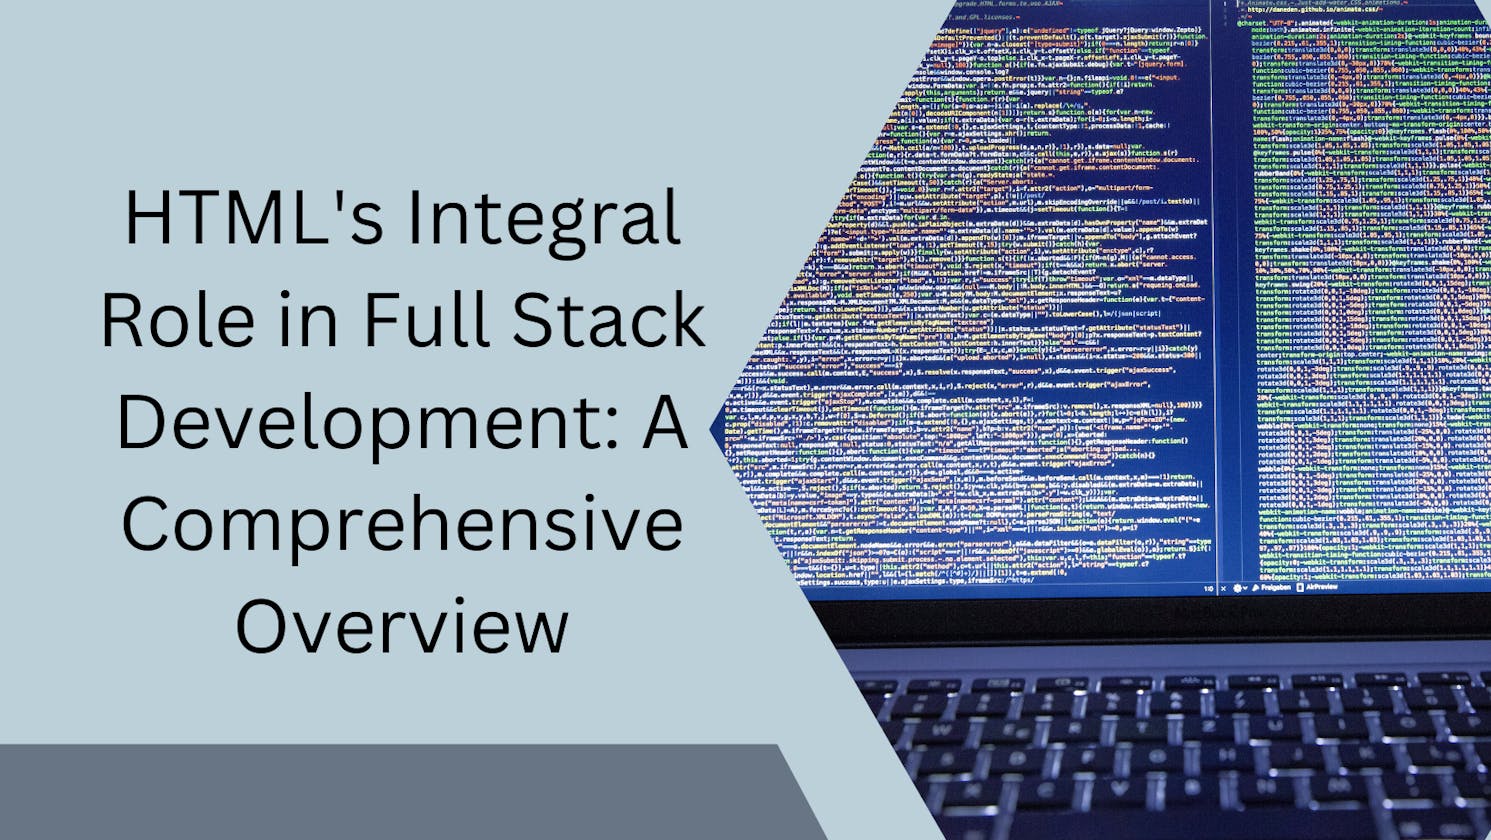 HTML's Integral Role in Full Stack Development: A Comprehensive Overview